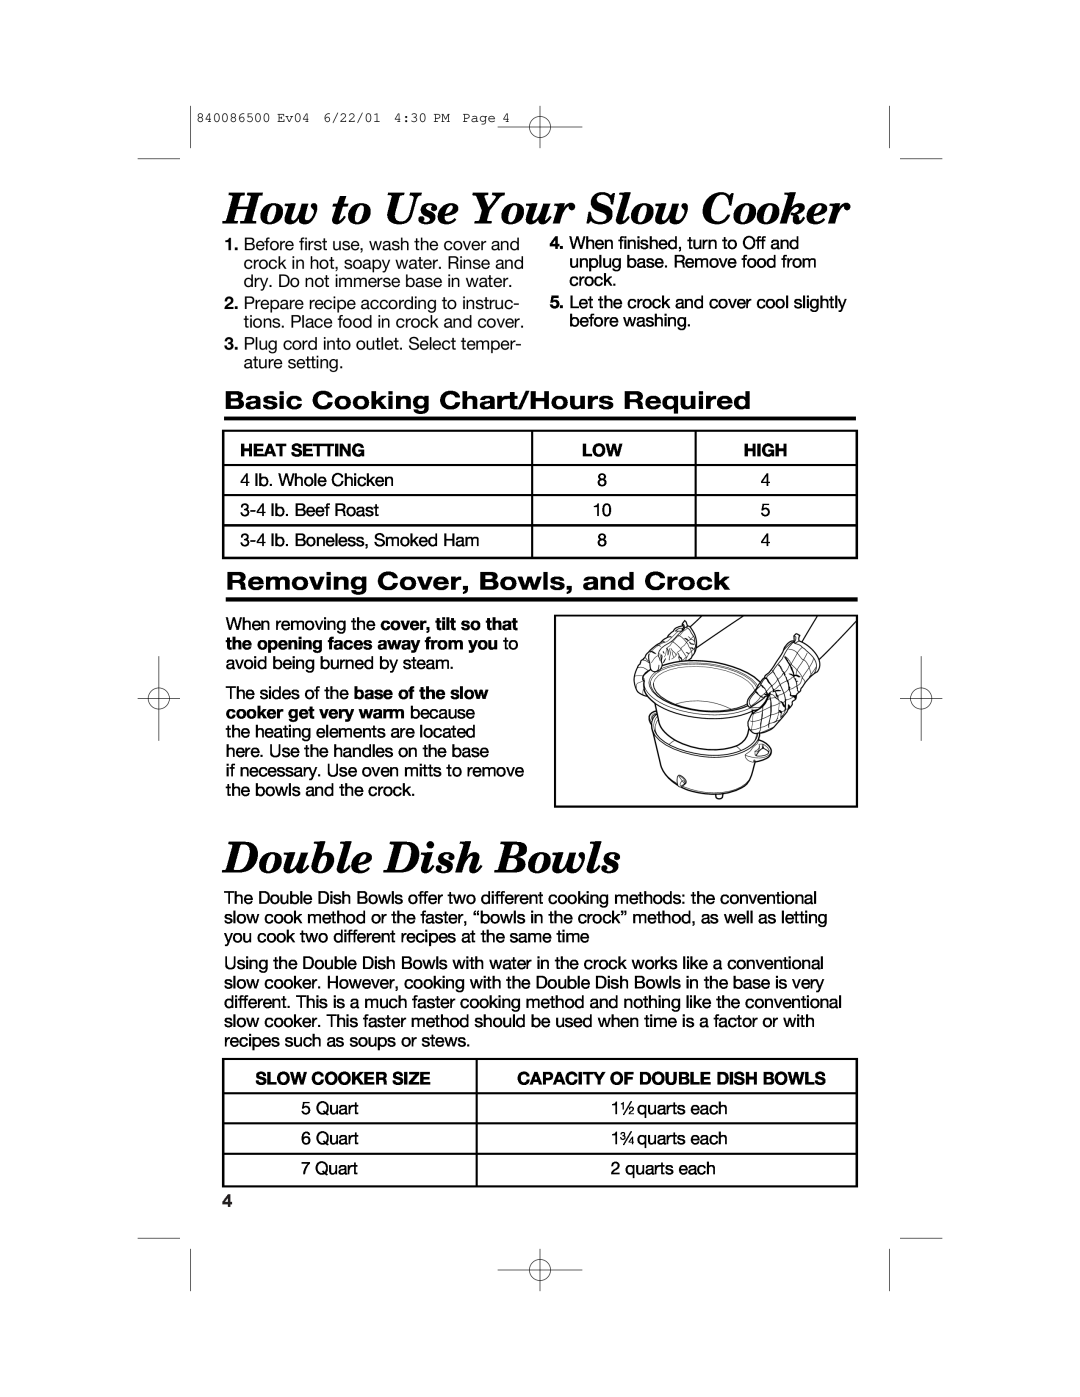 Hamilton Beach 33158 How to Use Your Slow Cooker, Double Dish Bowls, Basic Cooking Chart/Hours Required, Heat Setting 